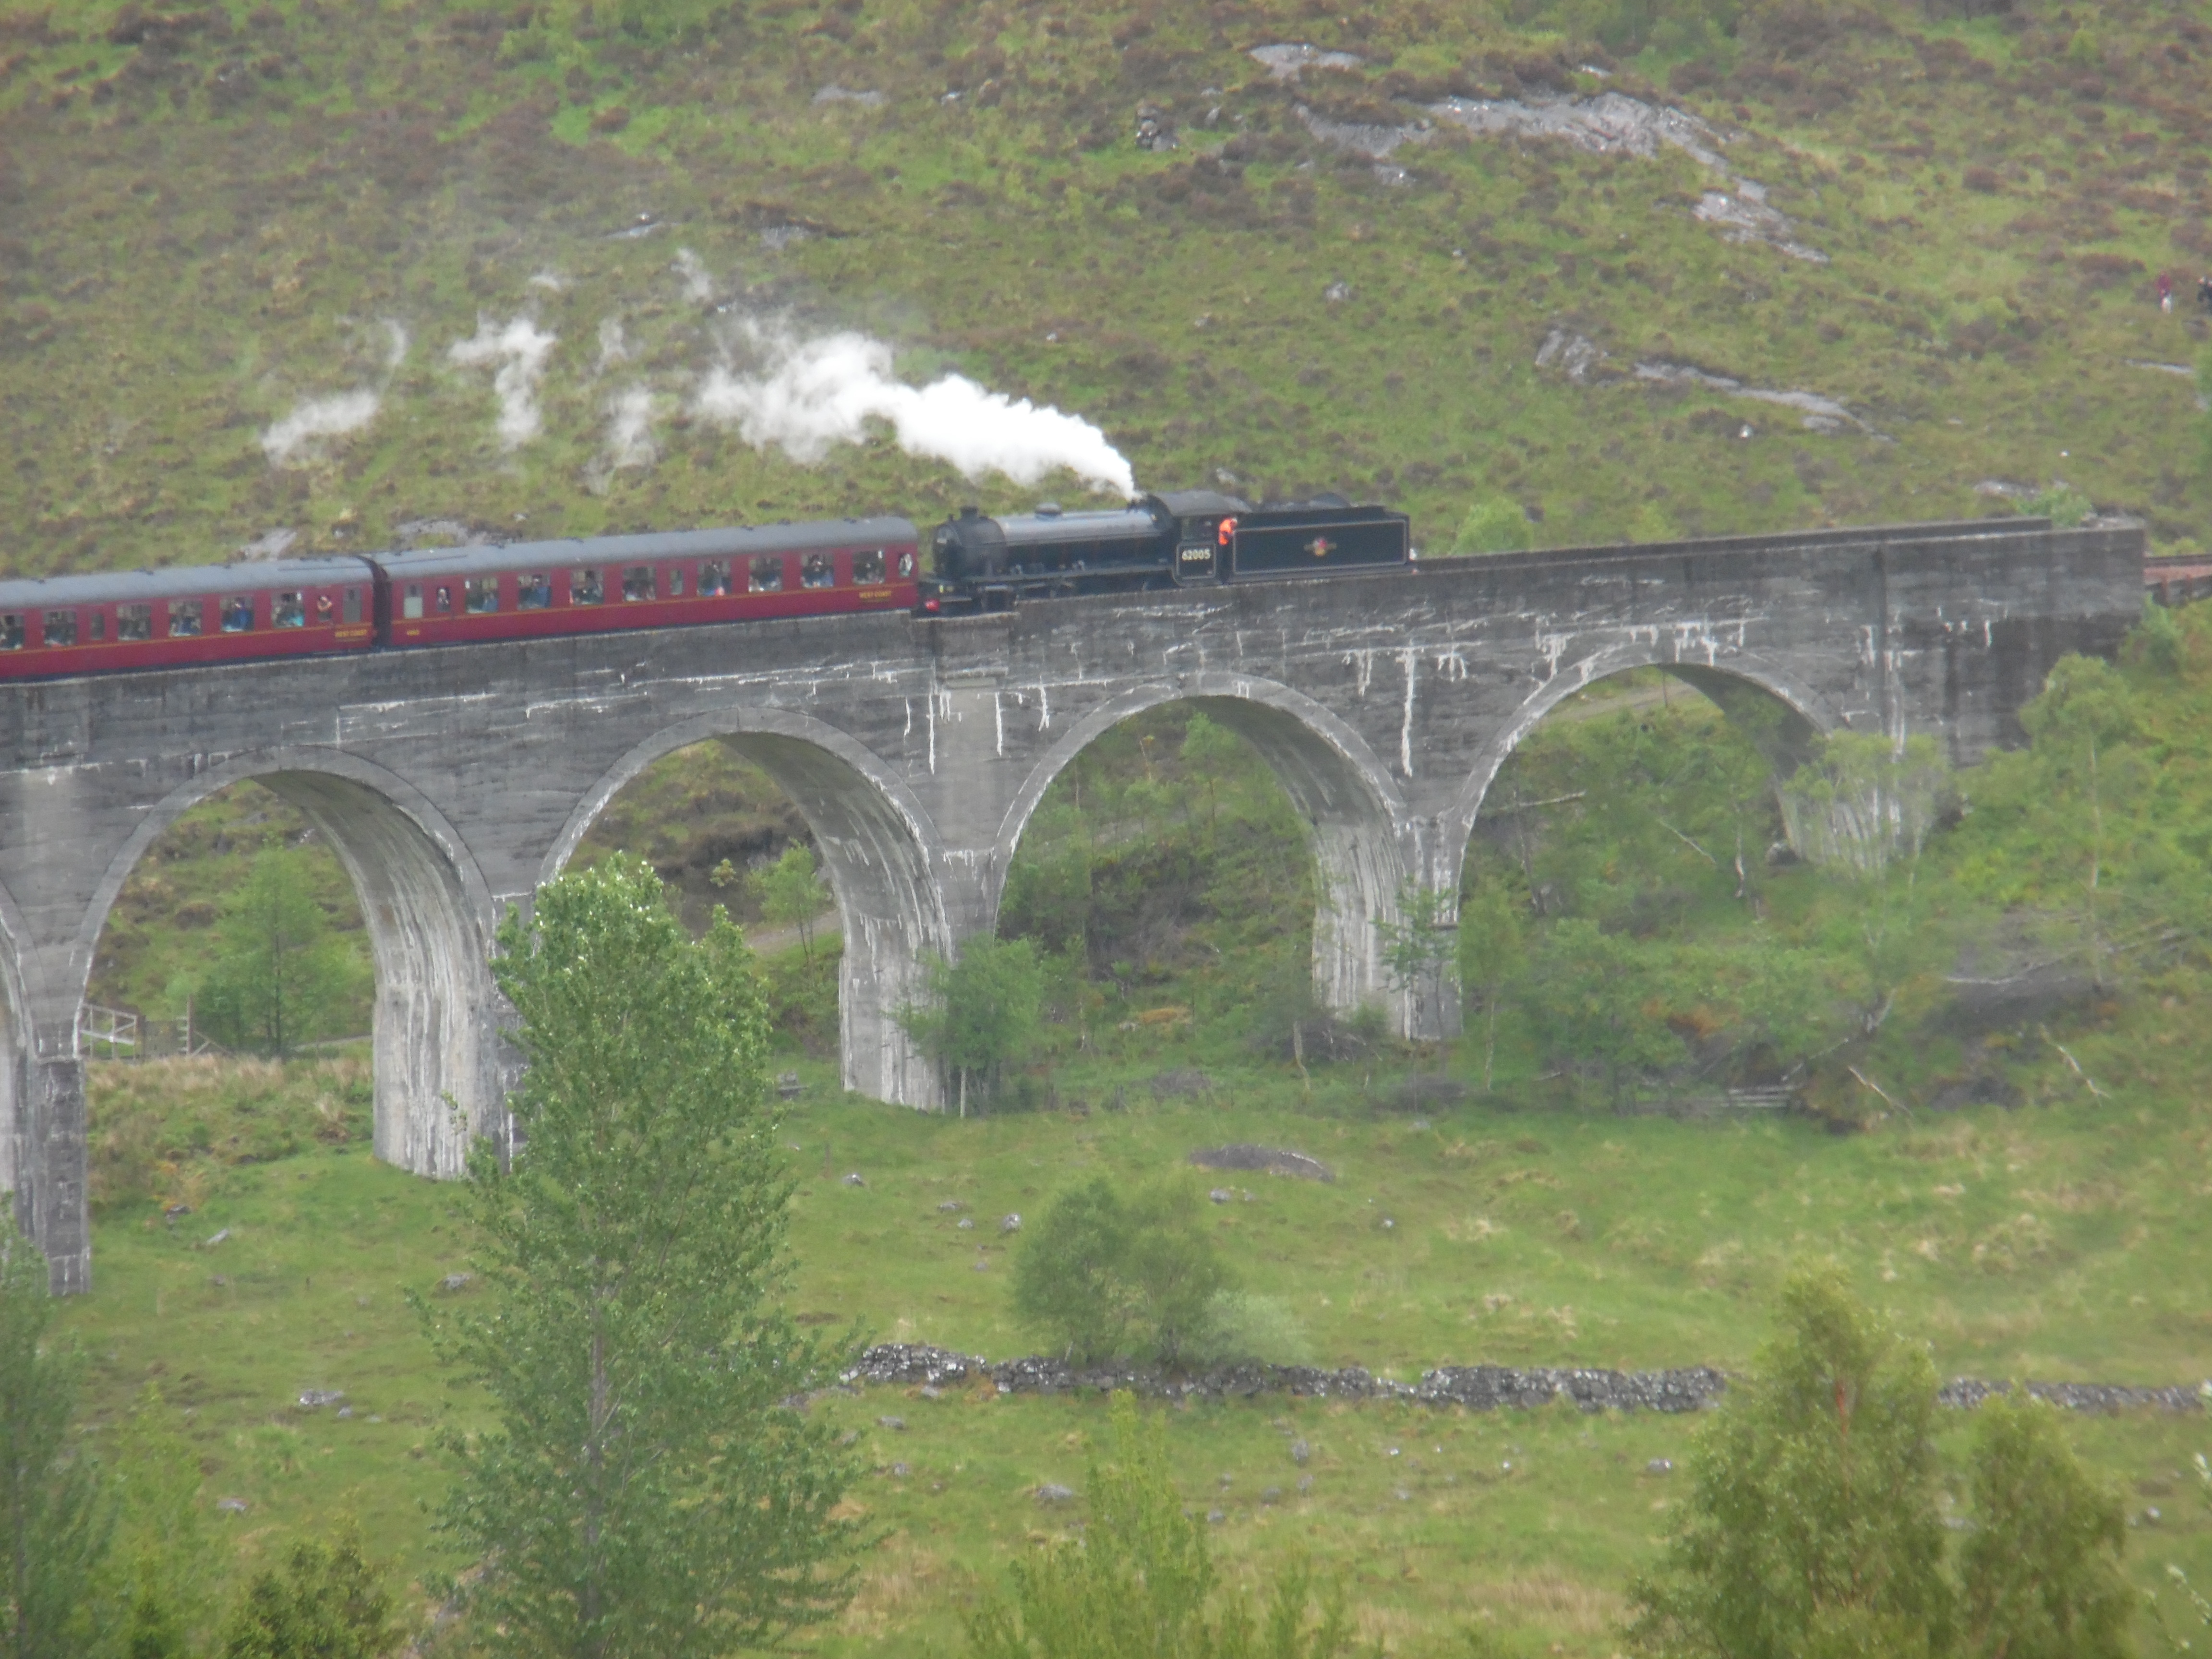 crossing the viaduct